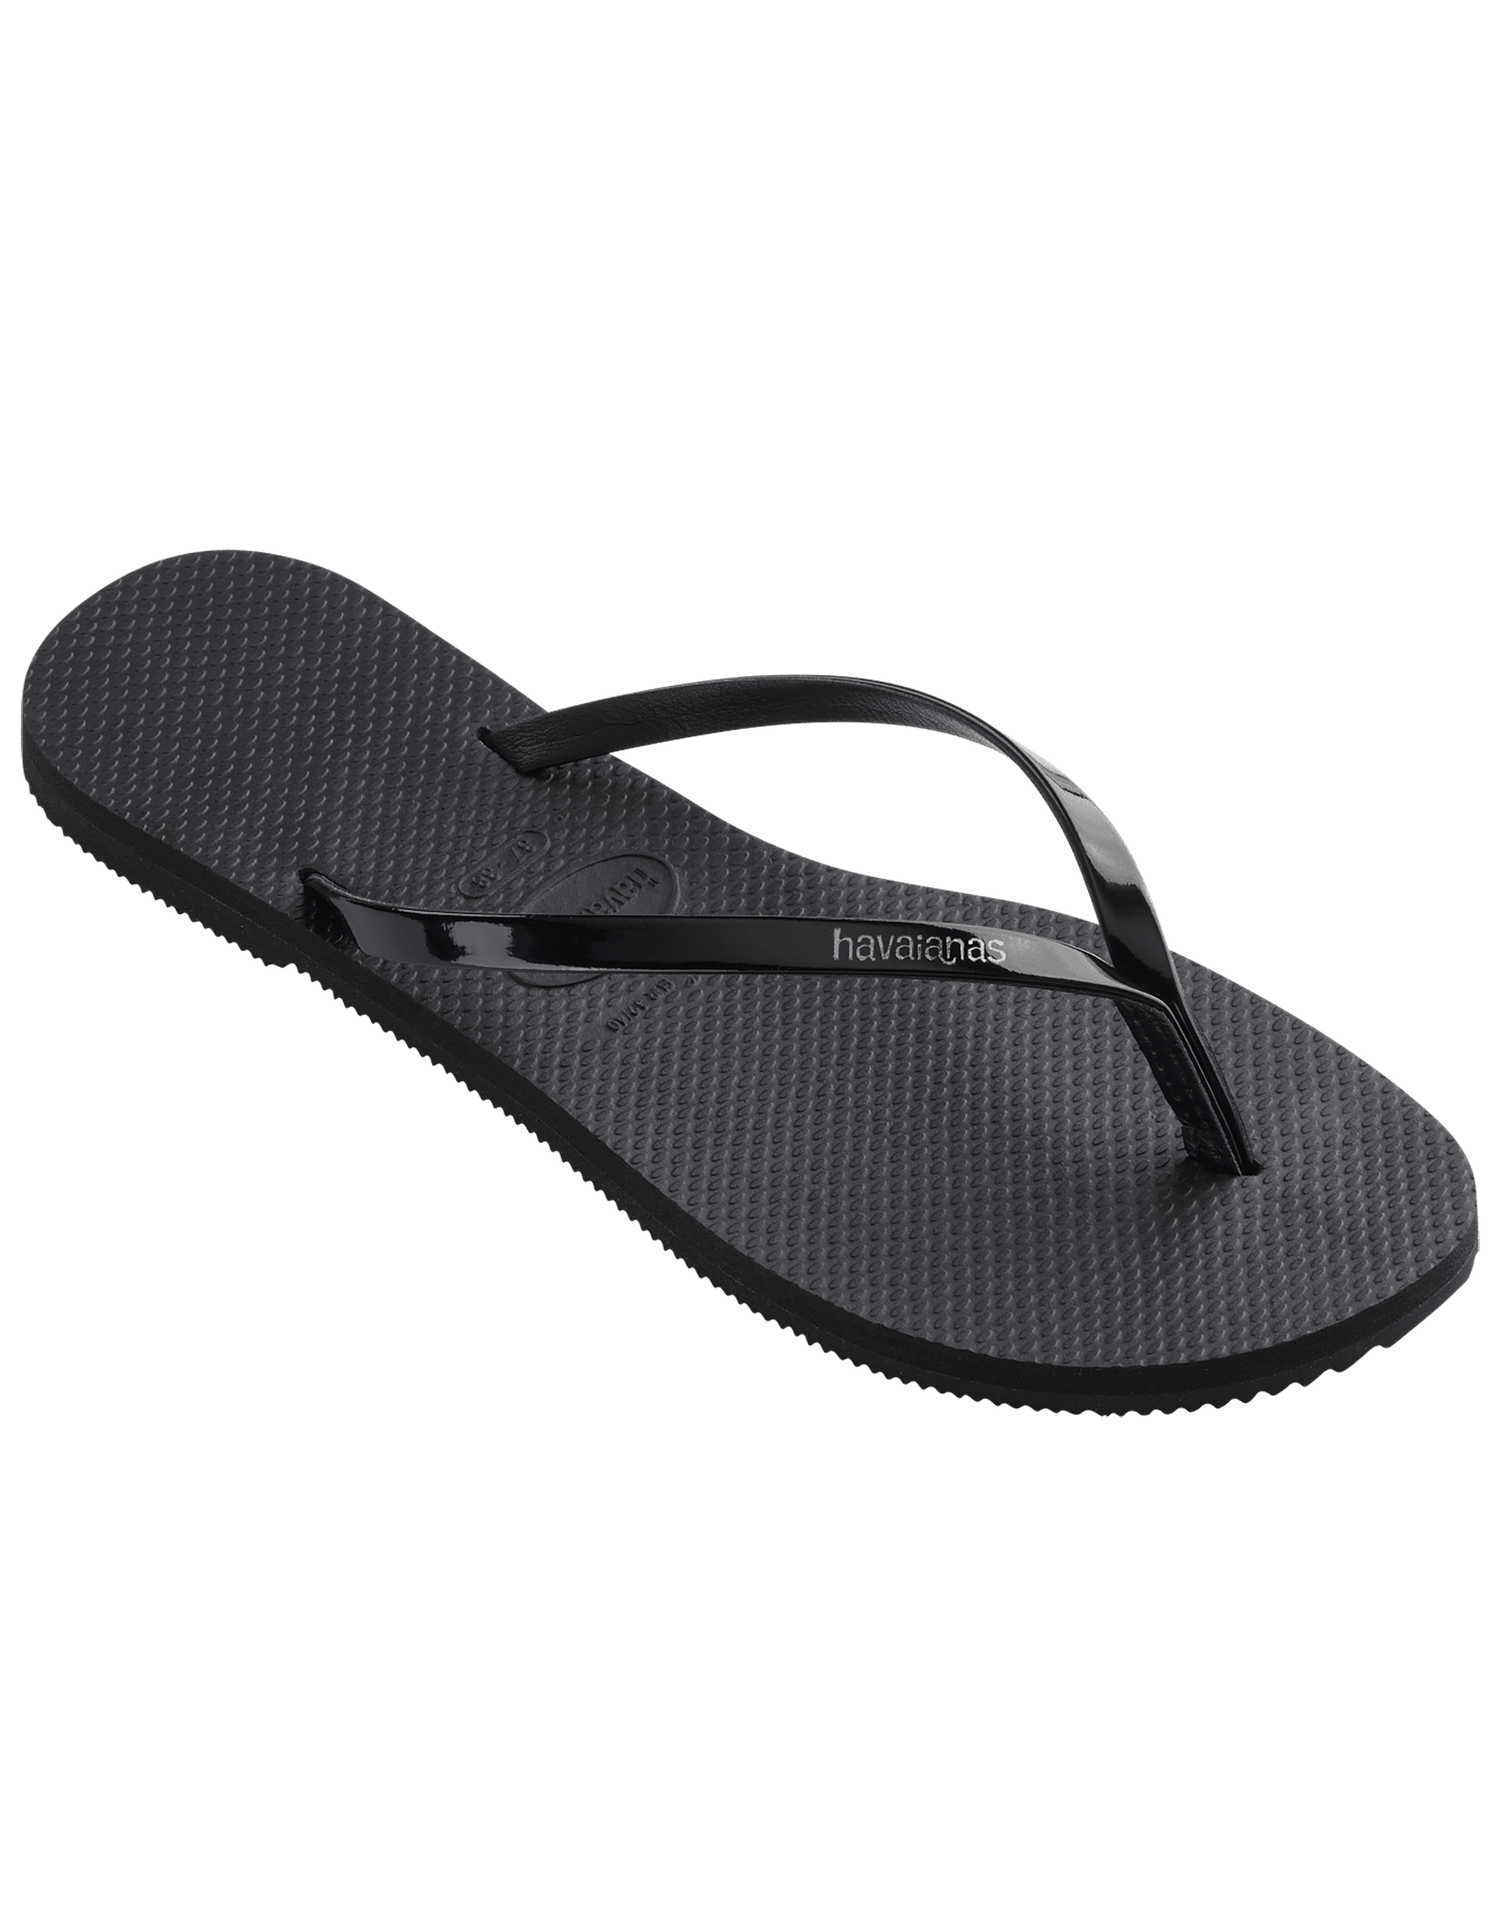 You Metallic Sandal by Havaianas in Black - Angled View